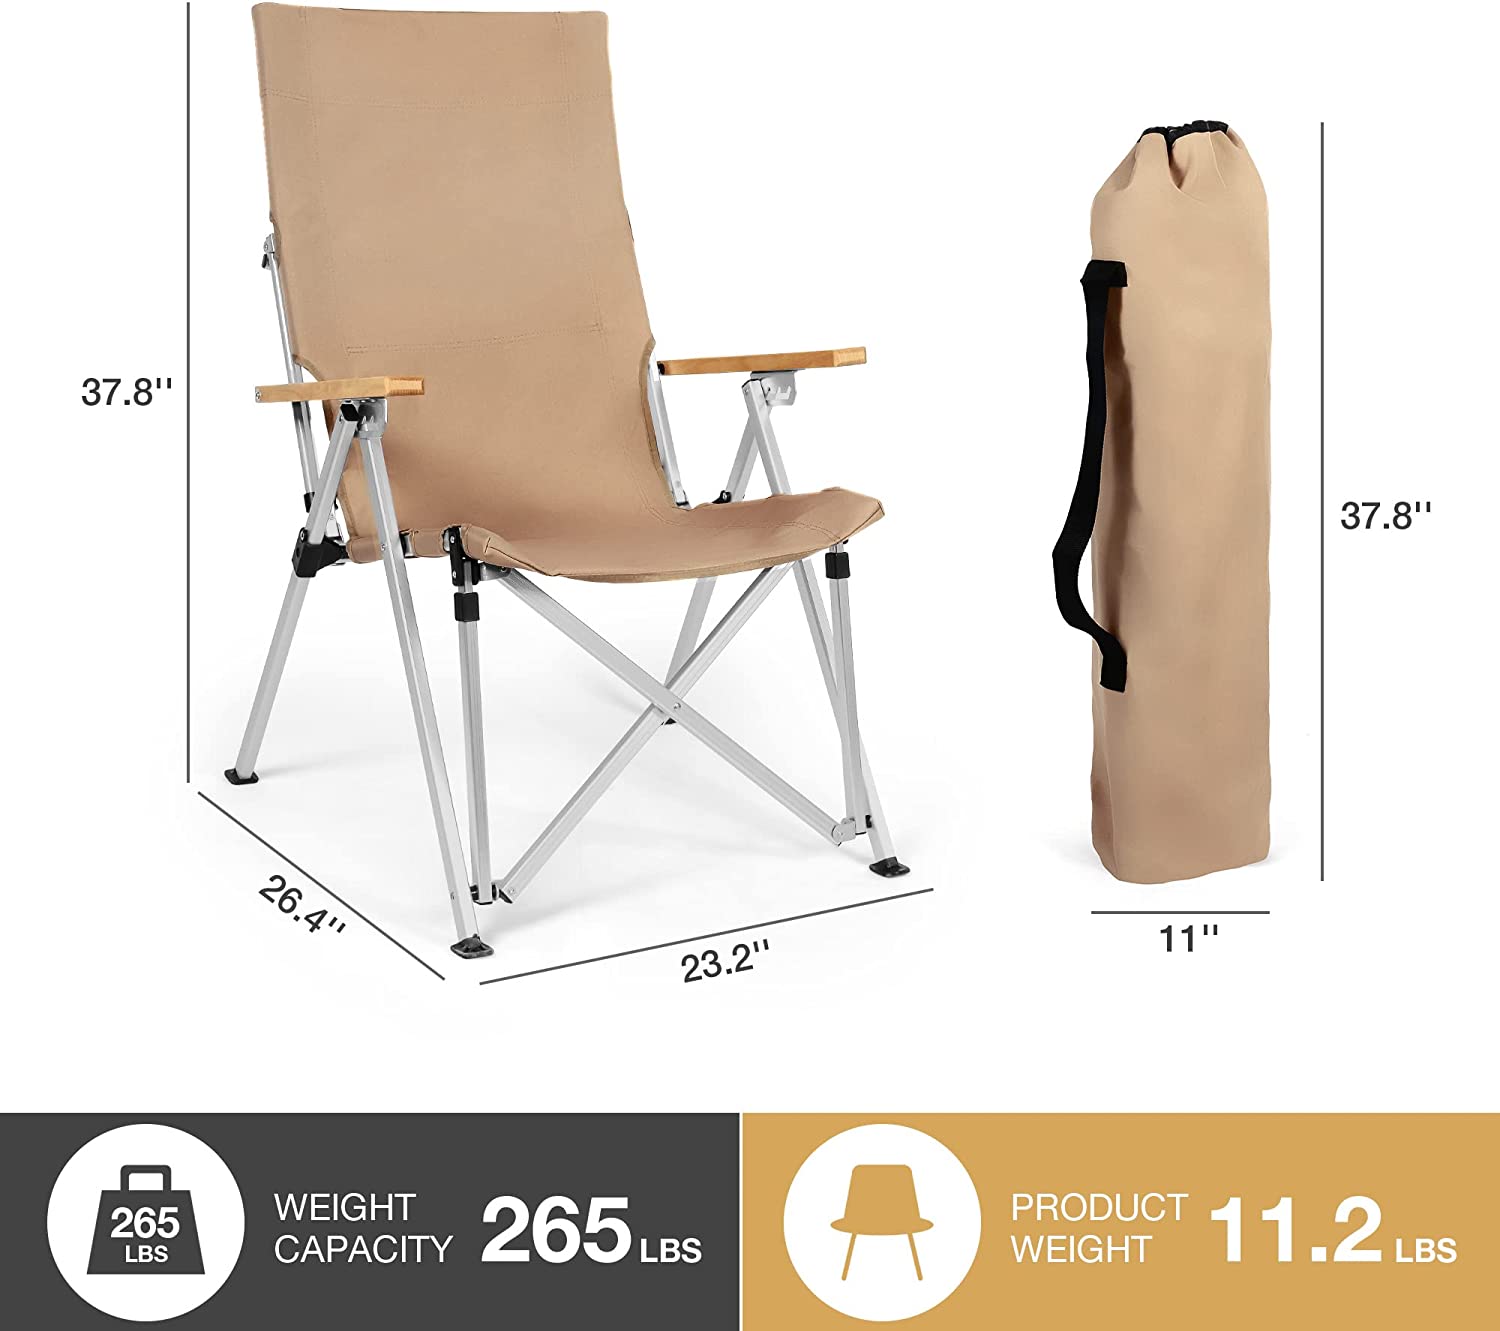 Portable Ultralight Camping Chairs, Adjustable High Back Chairs w/ Arm Rest and Carry Bag